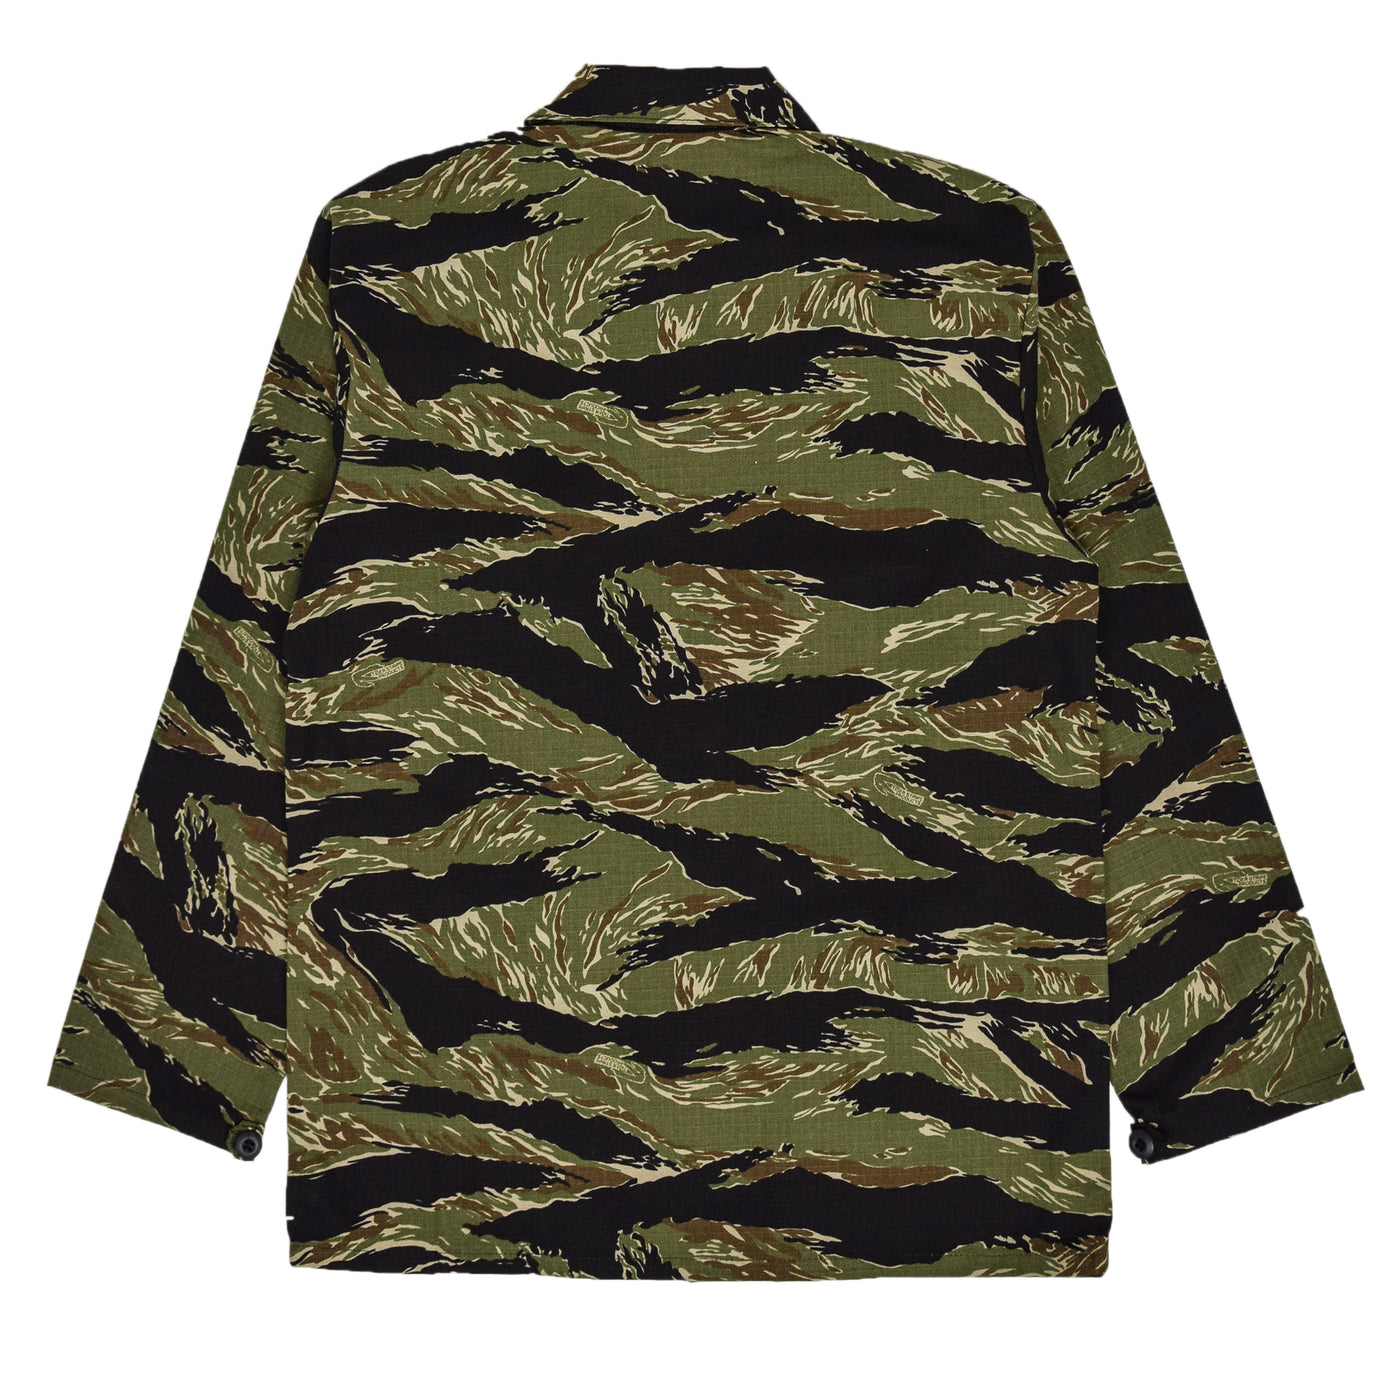 Stan Ray Four Pocket Tiger Stripe Camo Jacket Made in USA back